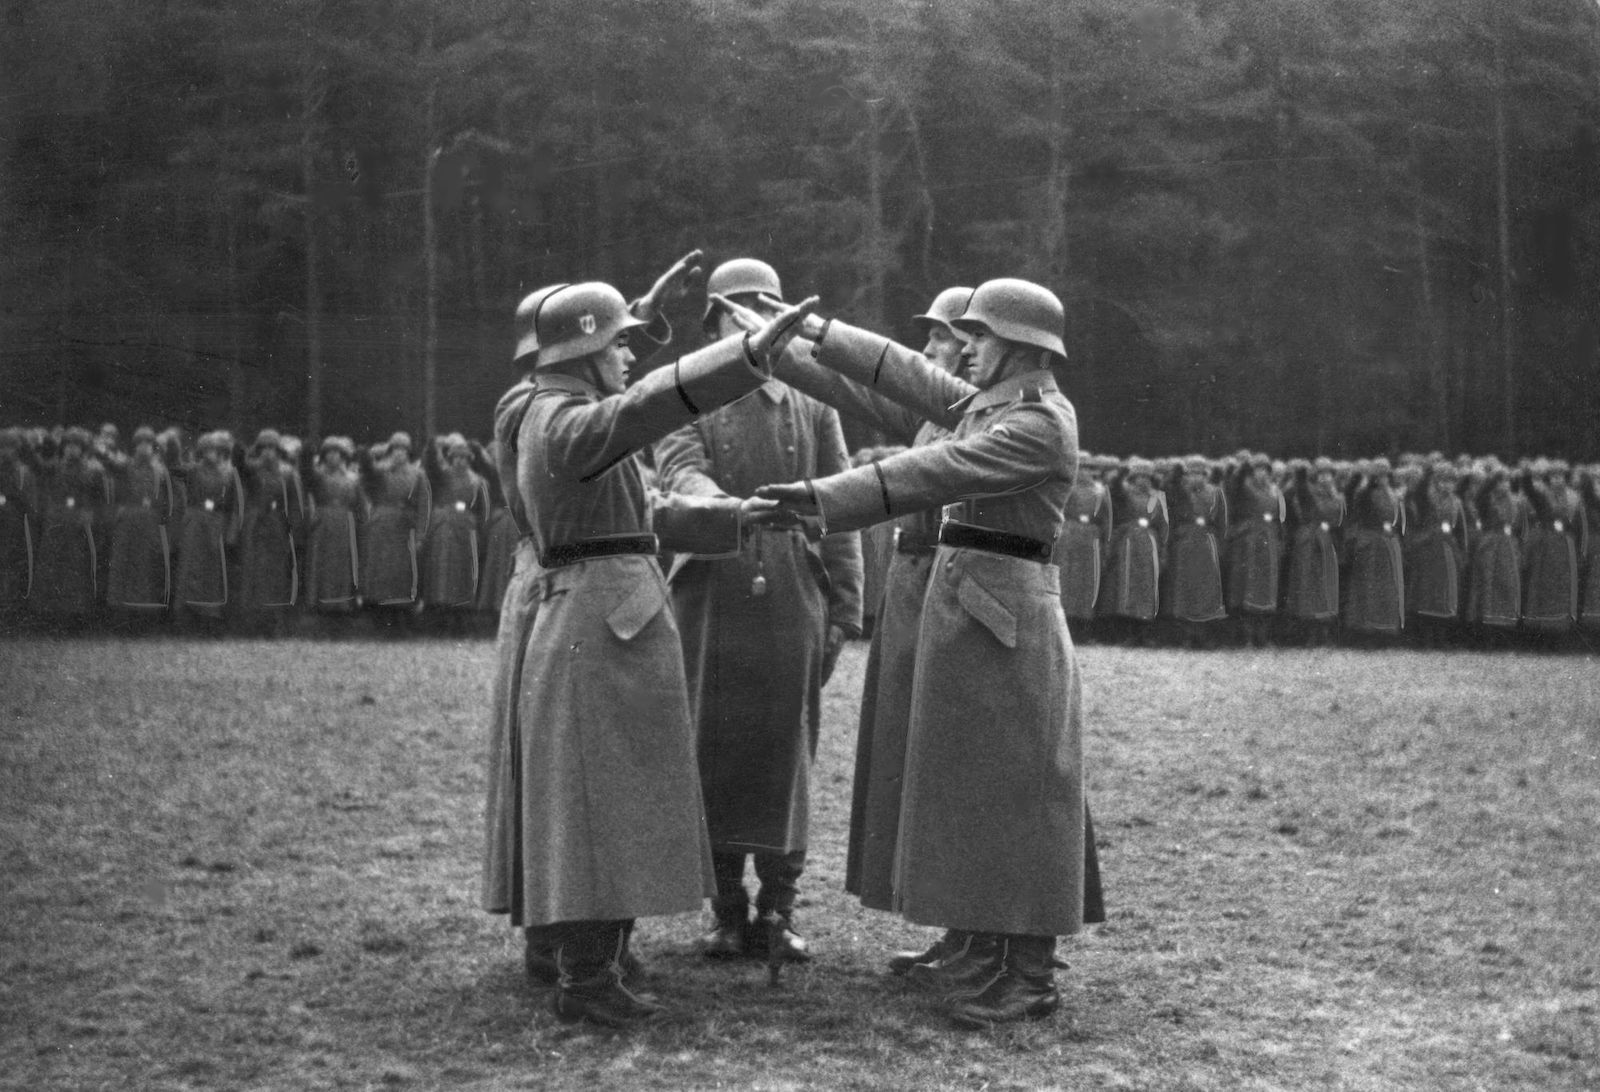 An old black and white photo shows a group of five soldiers wearing long coats and bucket helmets giving the Nazi salute in the middle of a grass field. In the background a legion of similarly dressed soldiers can be seen also giving the salute.